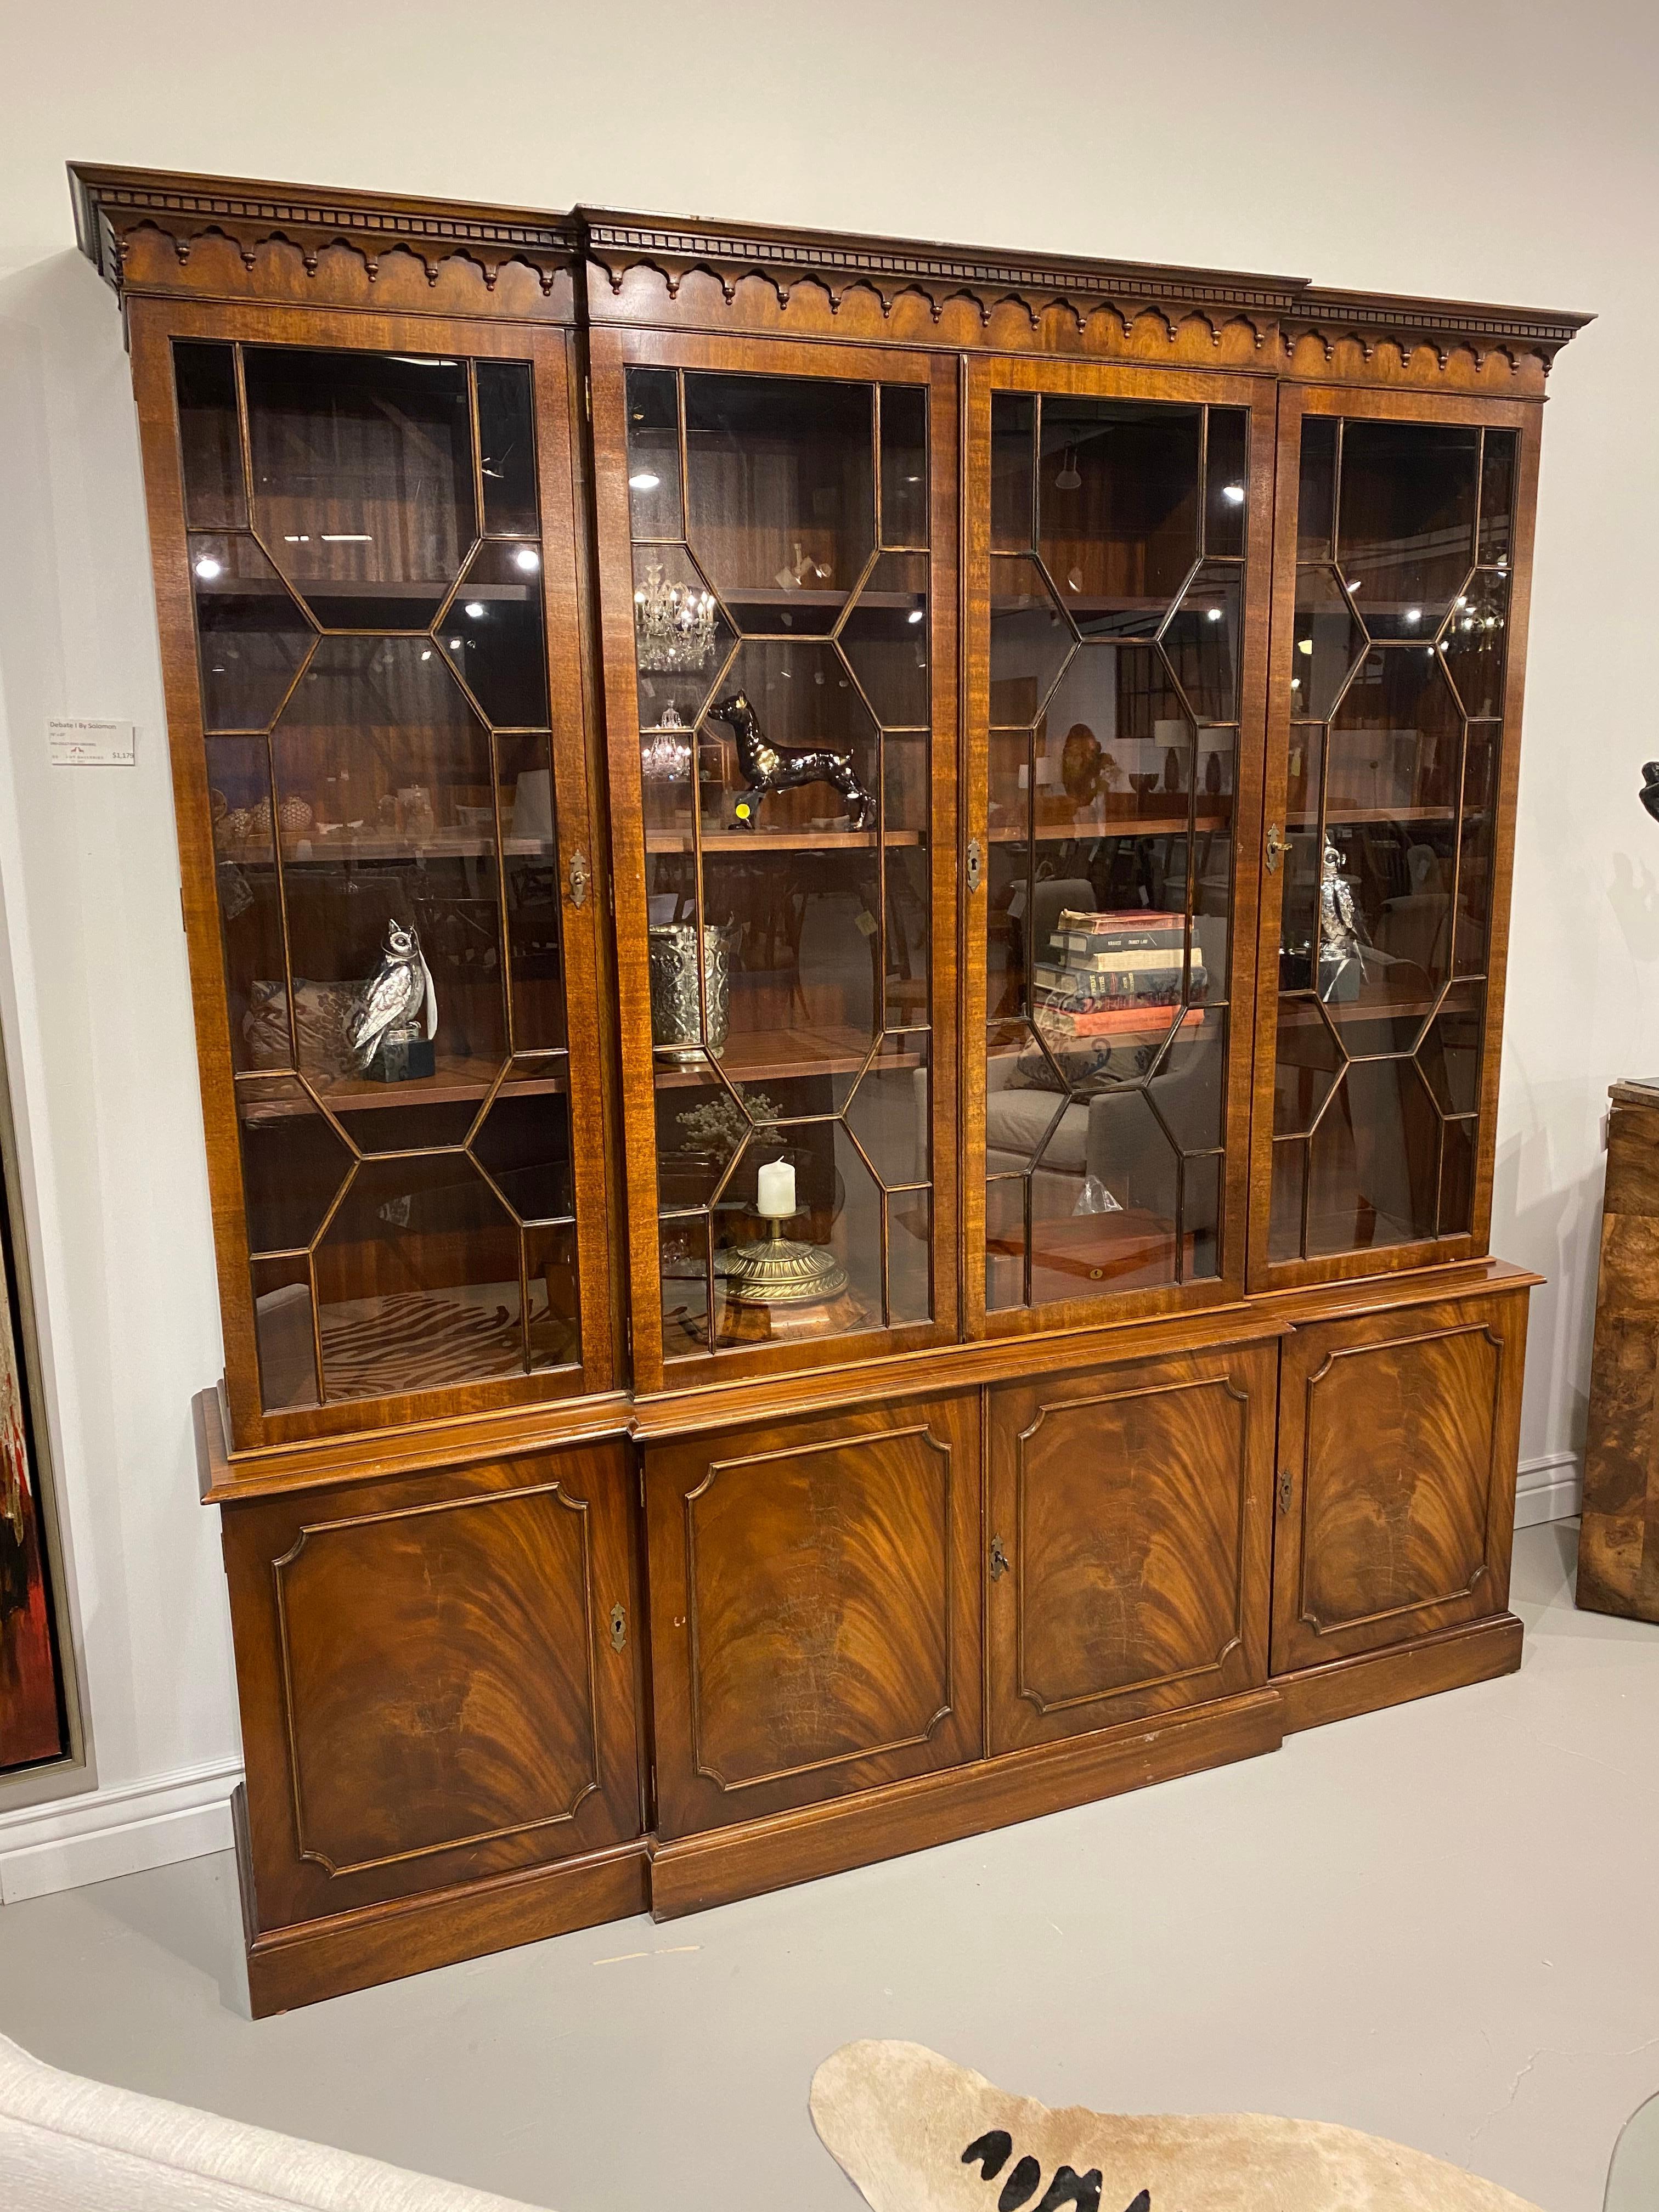 A beautiful full size four-door breakfront bookcase crafted in mahogany, by Bevan Funnel. Adjustable shelves behind the hand glazed upper door, the figured crotch mahogany on the lower doors has a lively grain, that shows slight checking which is